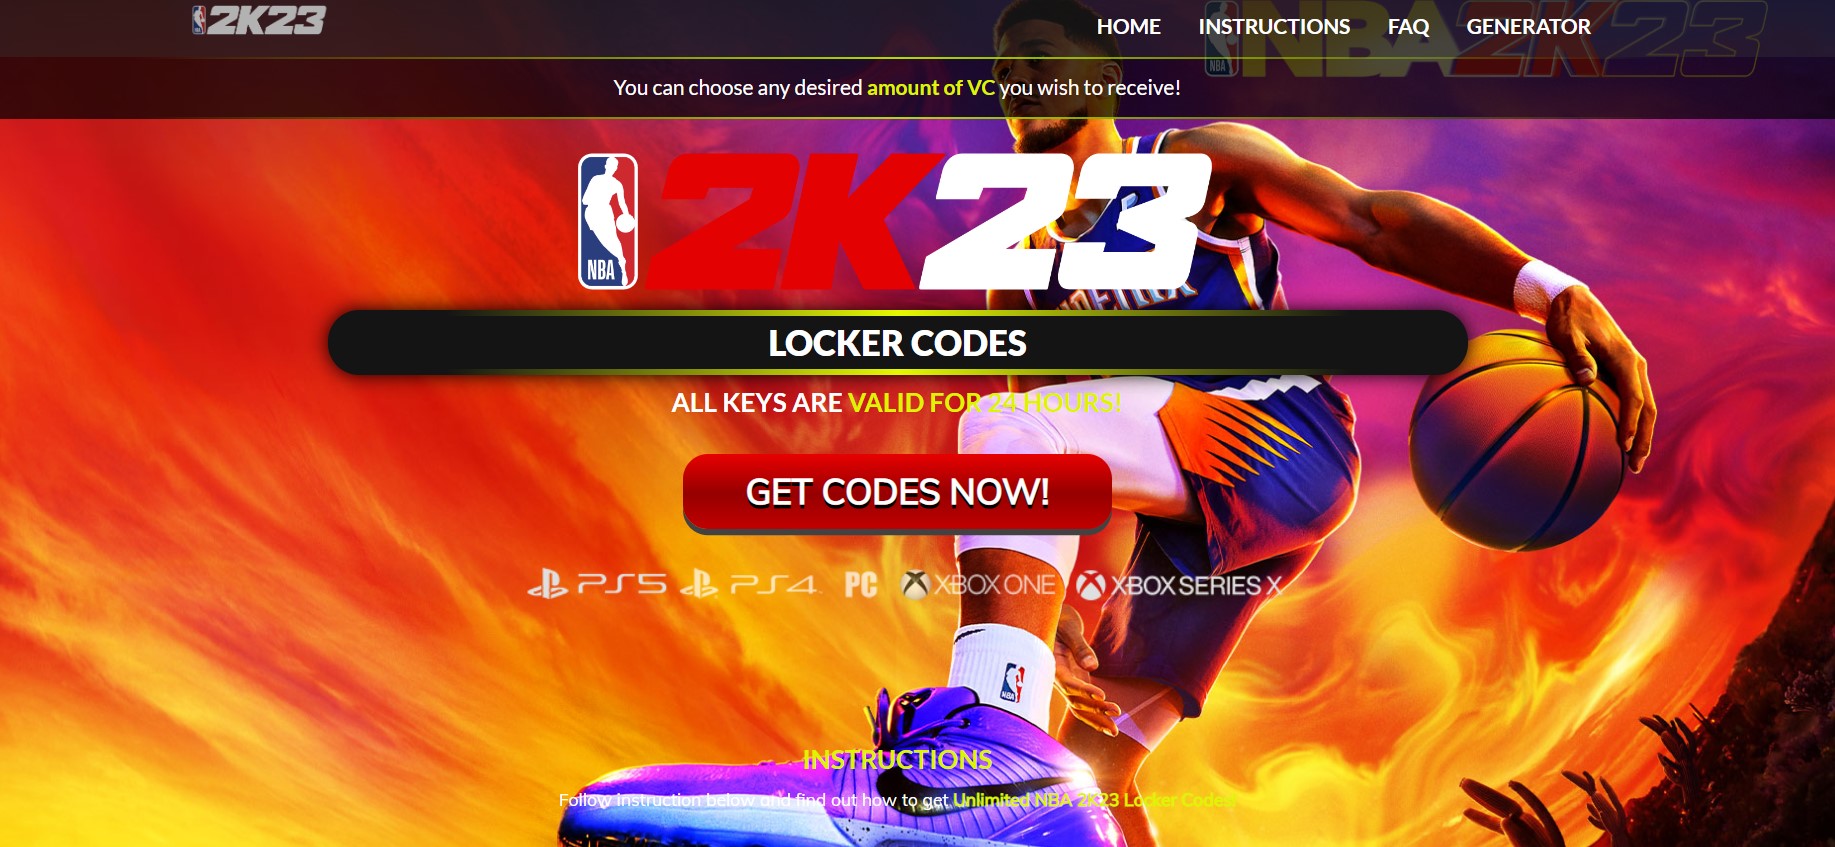 NBA 2K23 Locker Codes: What they do, the latest codes, and how to